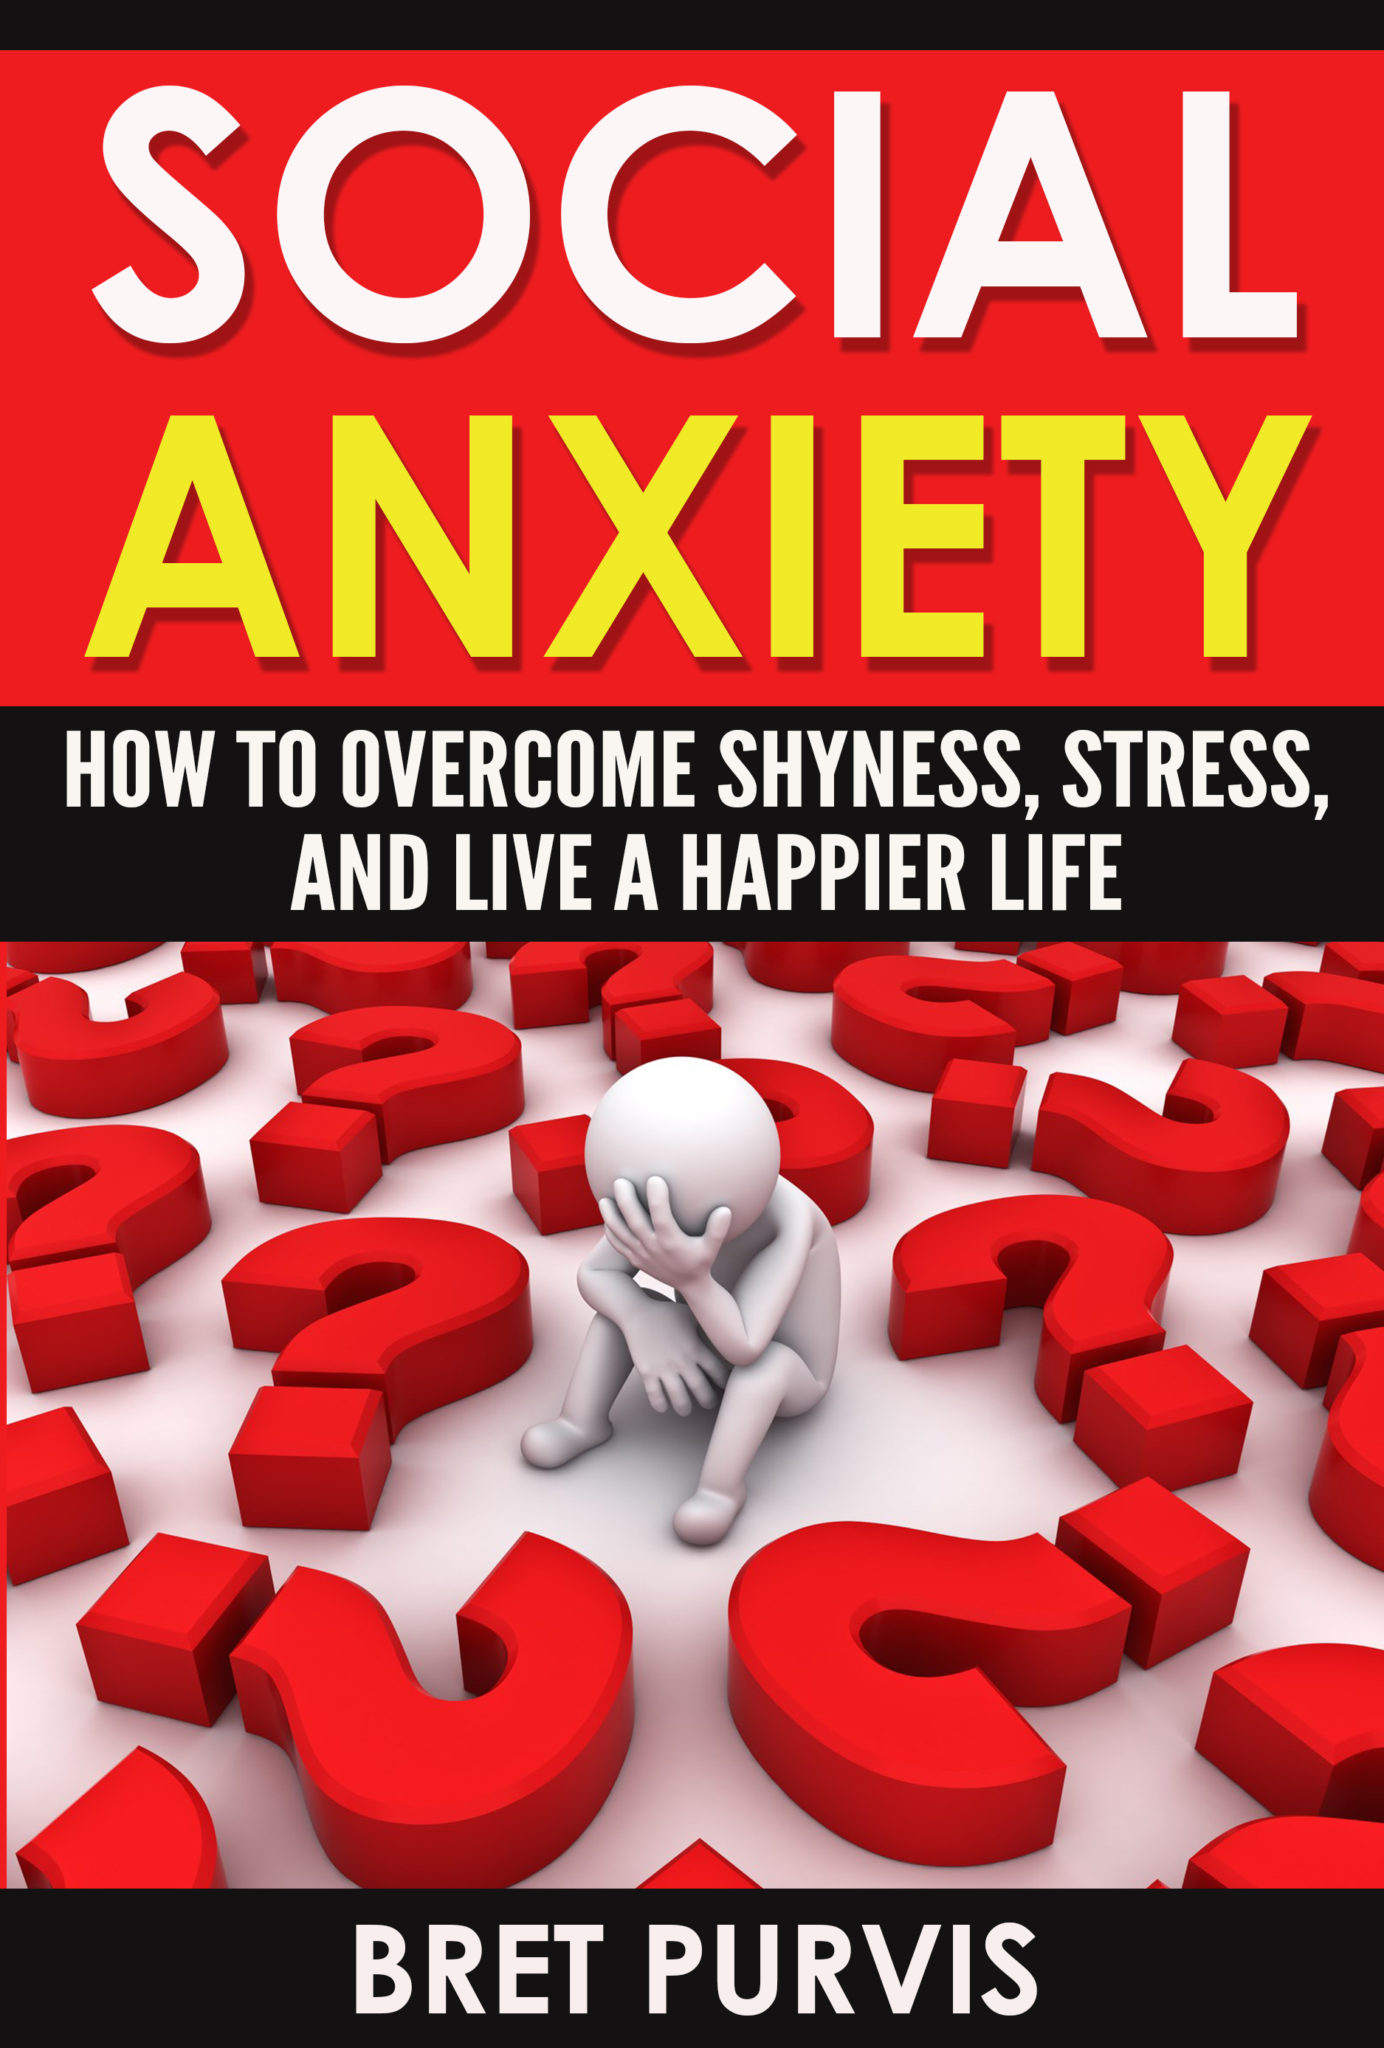 FREE: Social Anxiety: How to Overcome Shyness, Stress, and Live a Happier Life (Social Anxiety, Shyness, and Stress) by Bret Purvis